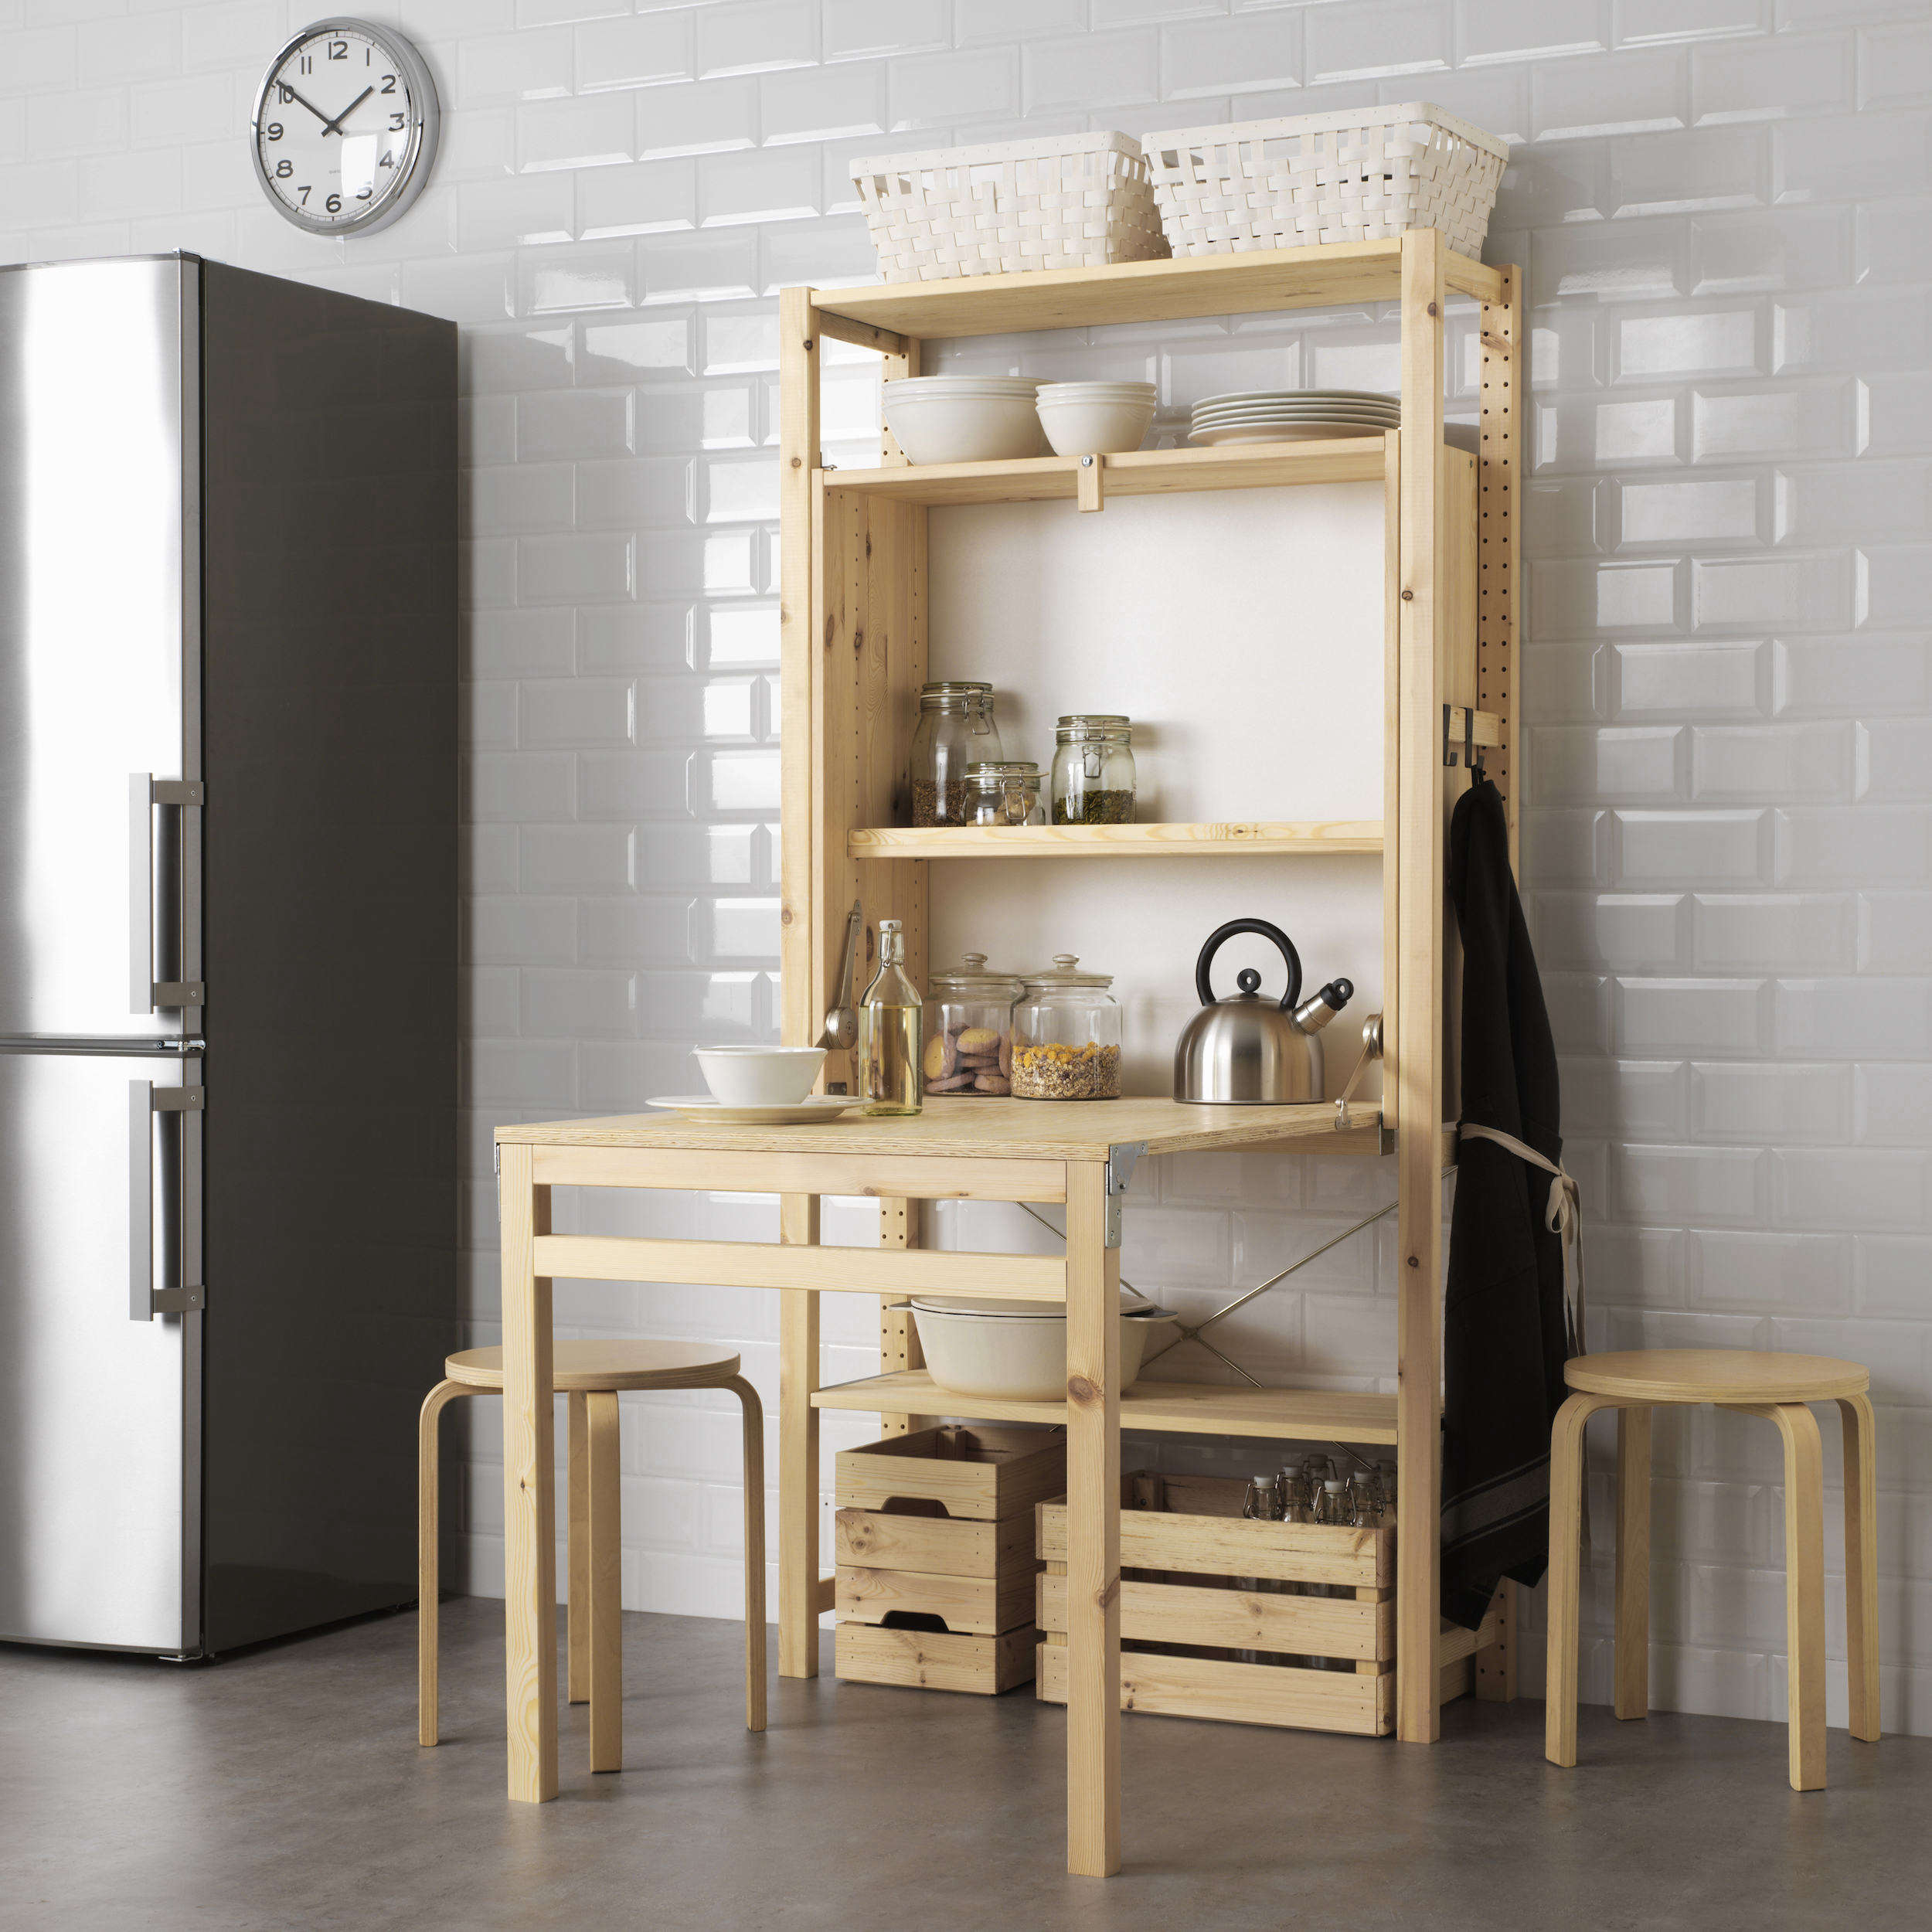 New to Ikea: Cool Foldable Table Small Kitchen